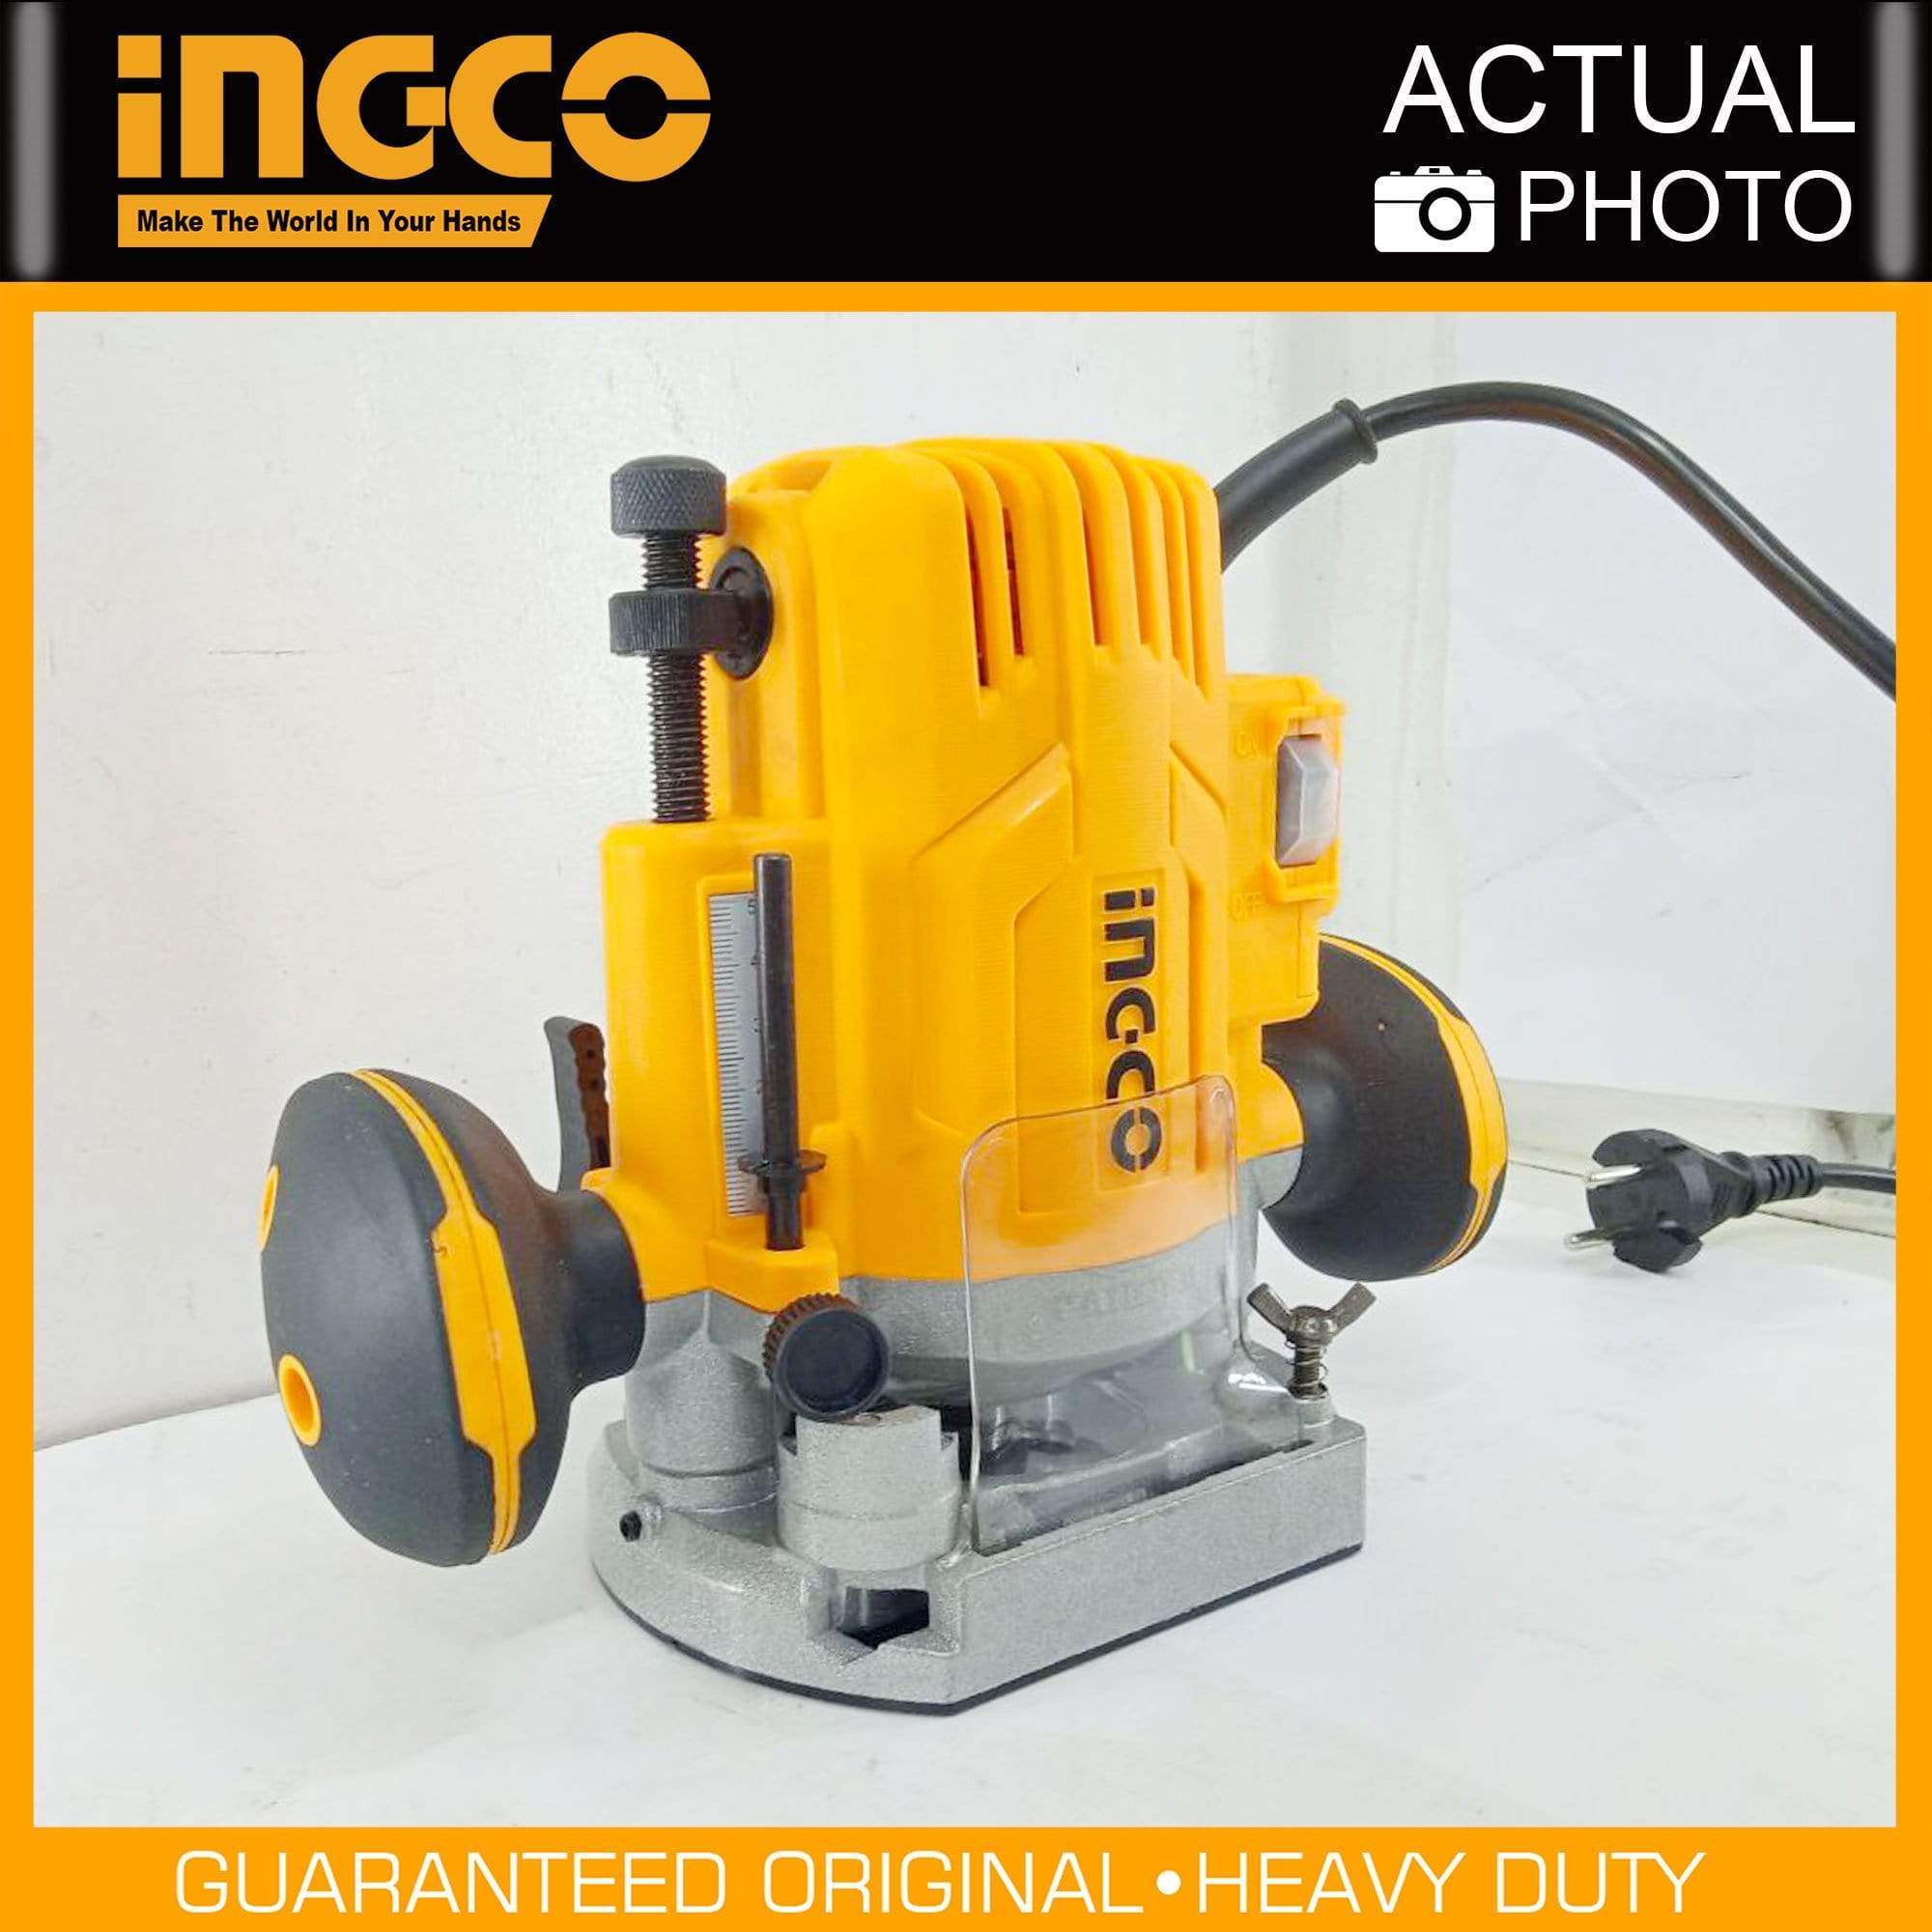 Ingco Electric Router 1200W - RT12008 | Supply Master | Accra, Ghana Tools Building Steel Engineering Hardware tool